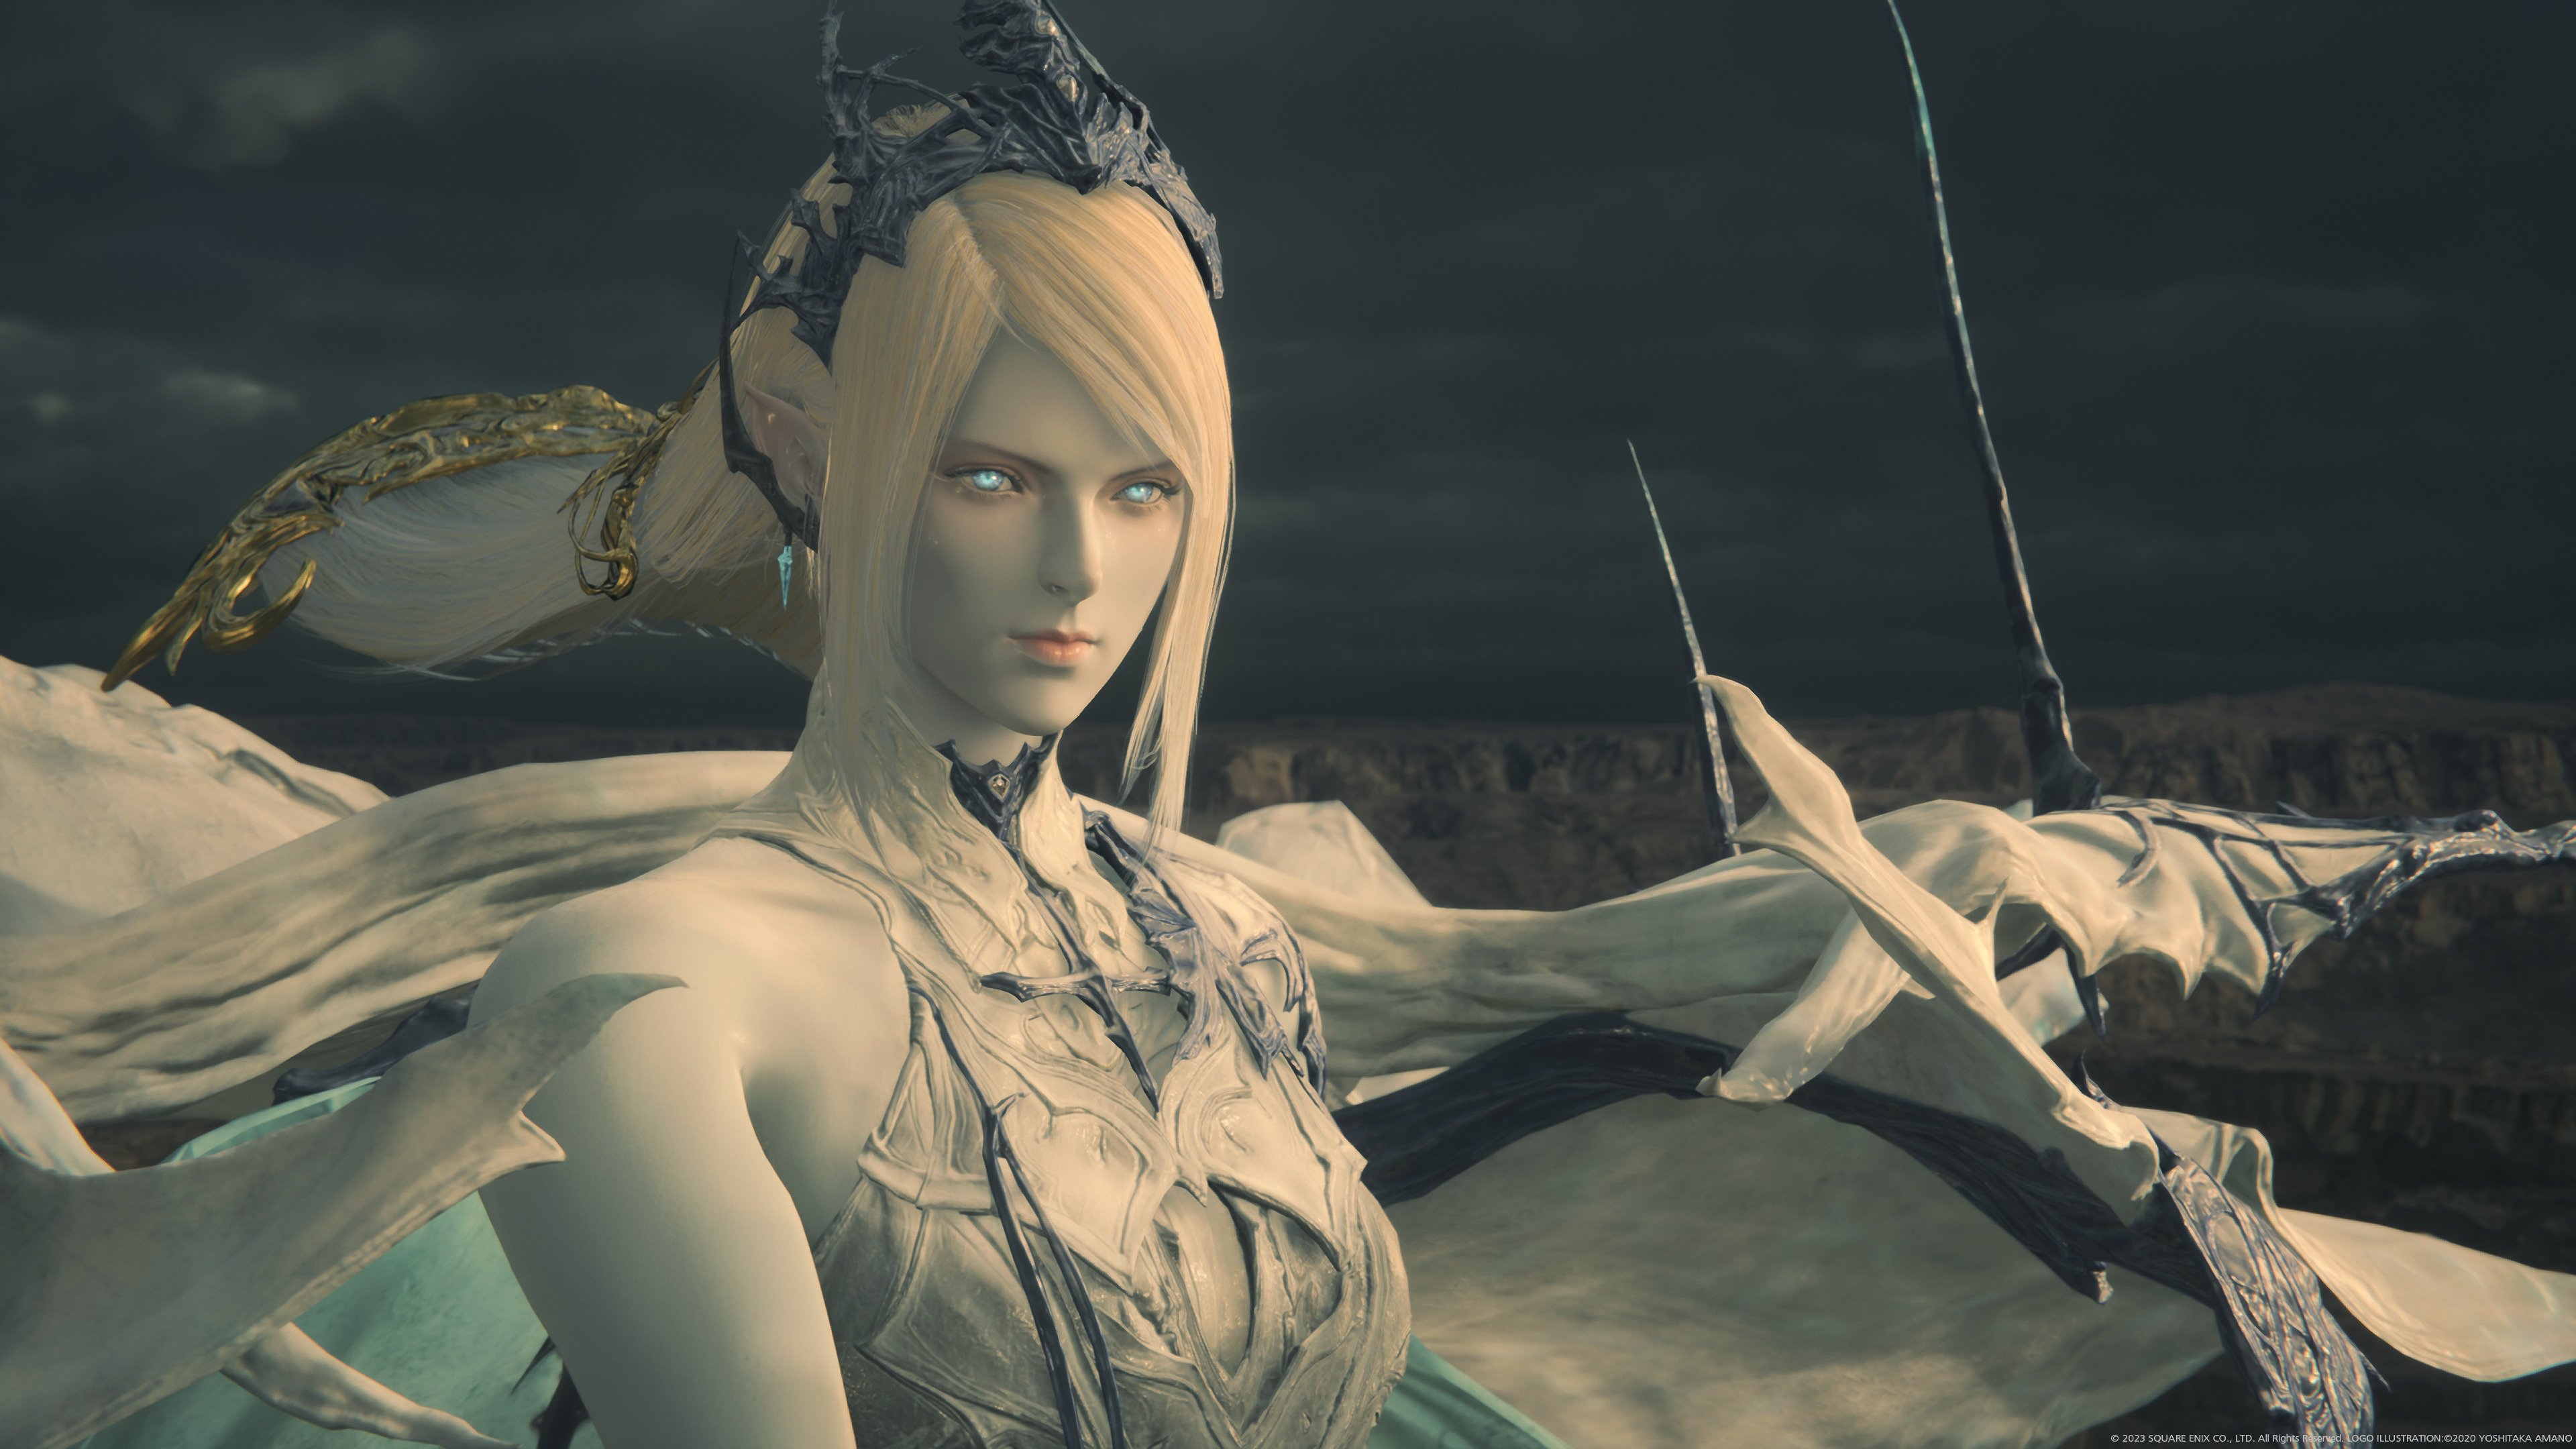 Final Fantasy XVI: two new story DLCs announced, first launches today –  PlayStation.Blog